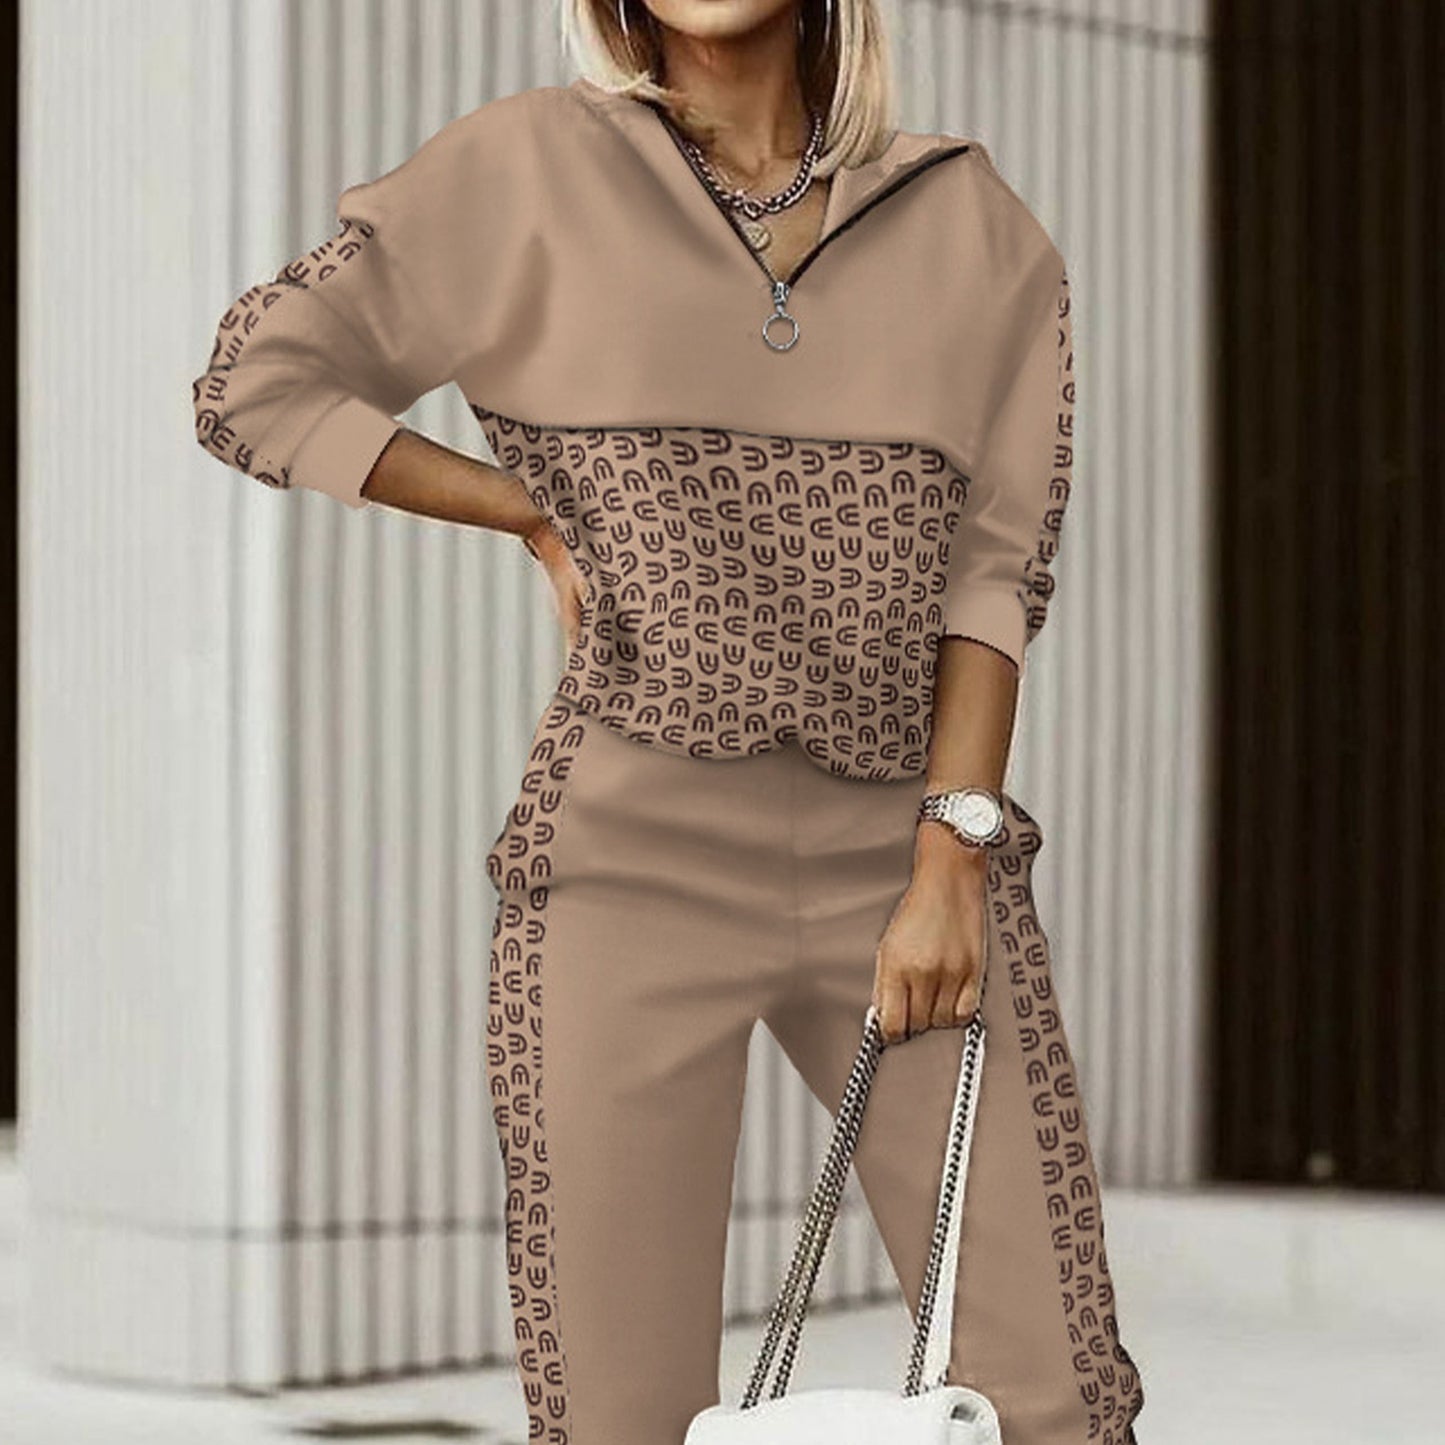 Women's Fashion Printing Long Sleeve Trousers Suit apparel & accessories